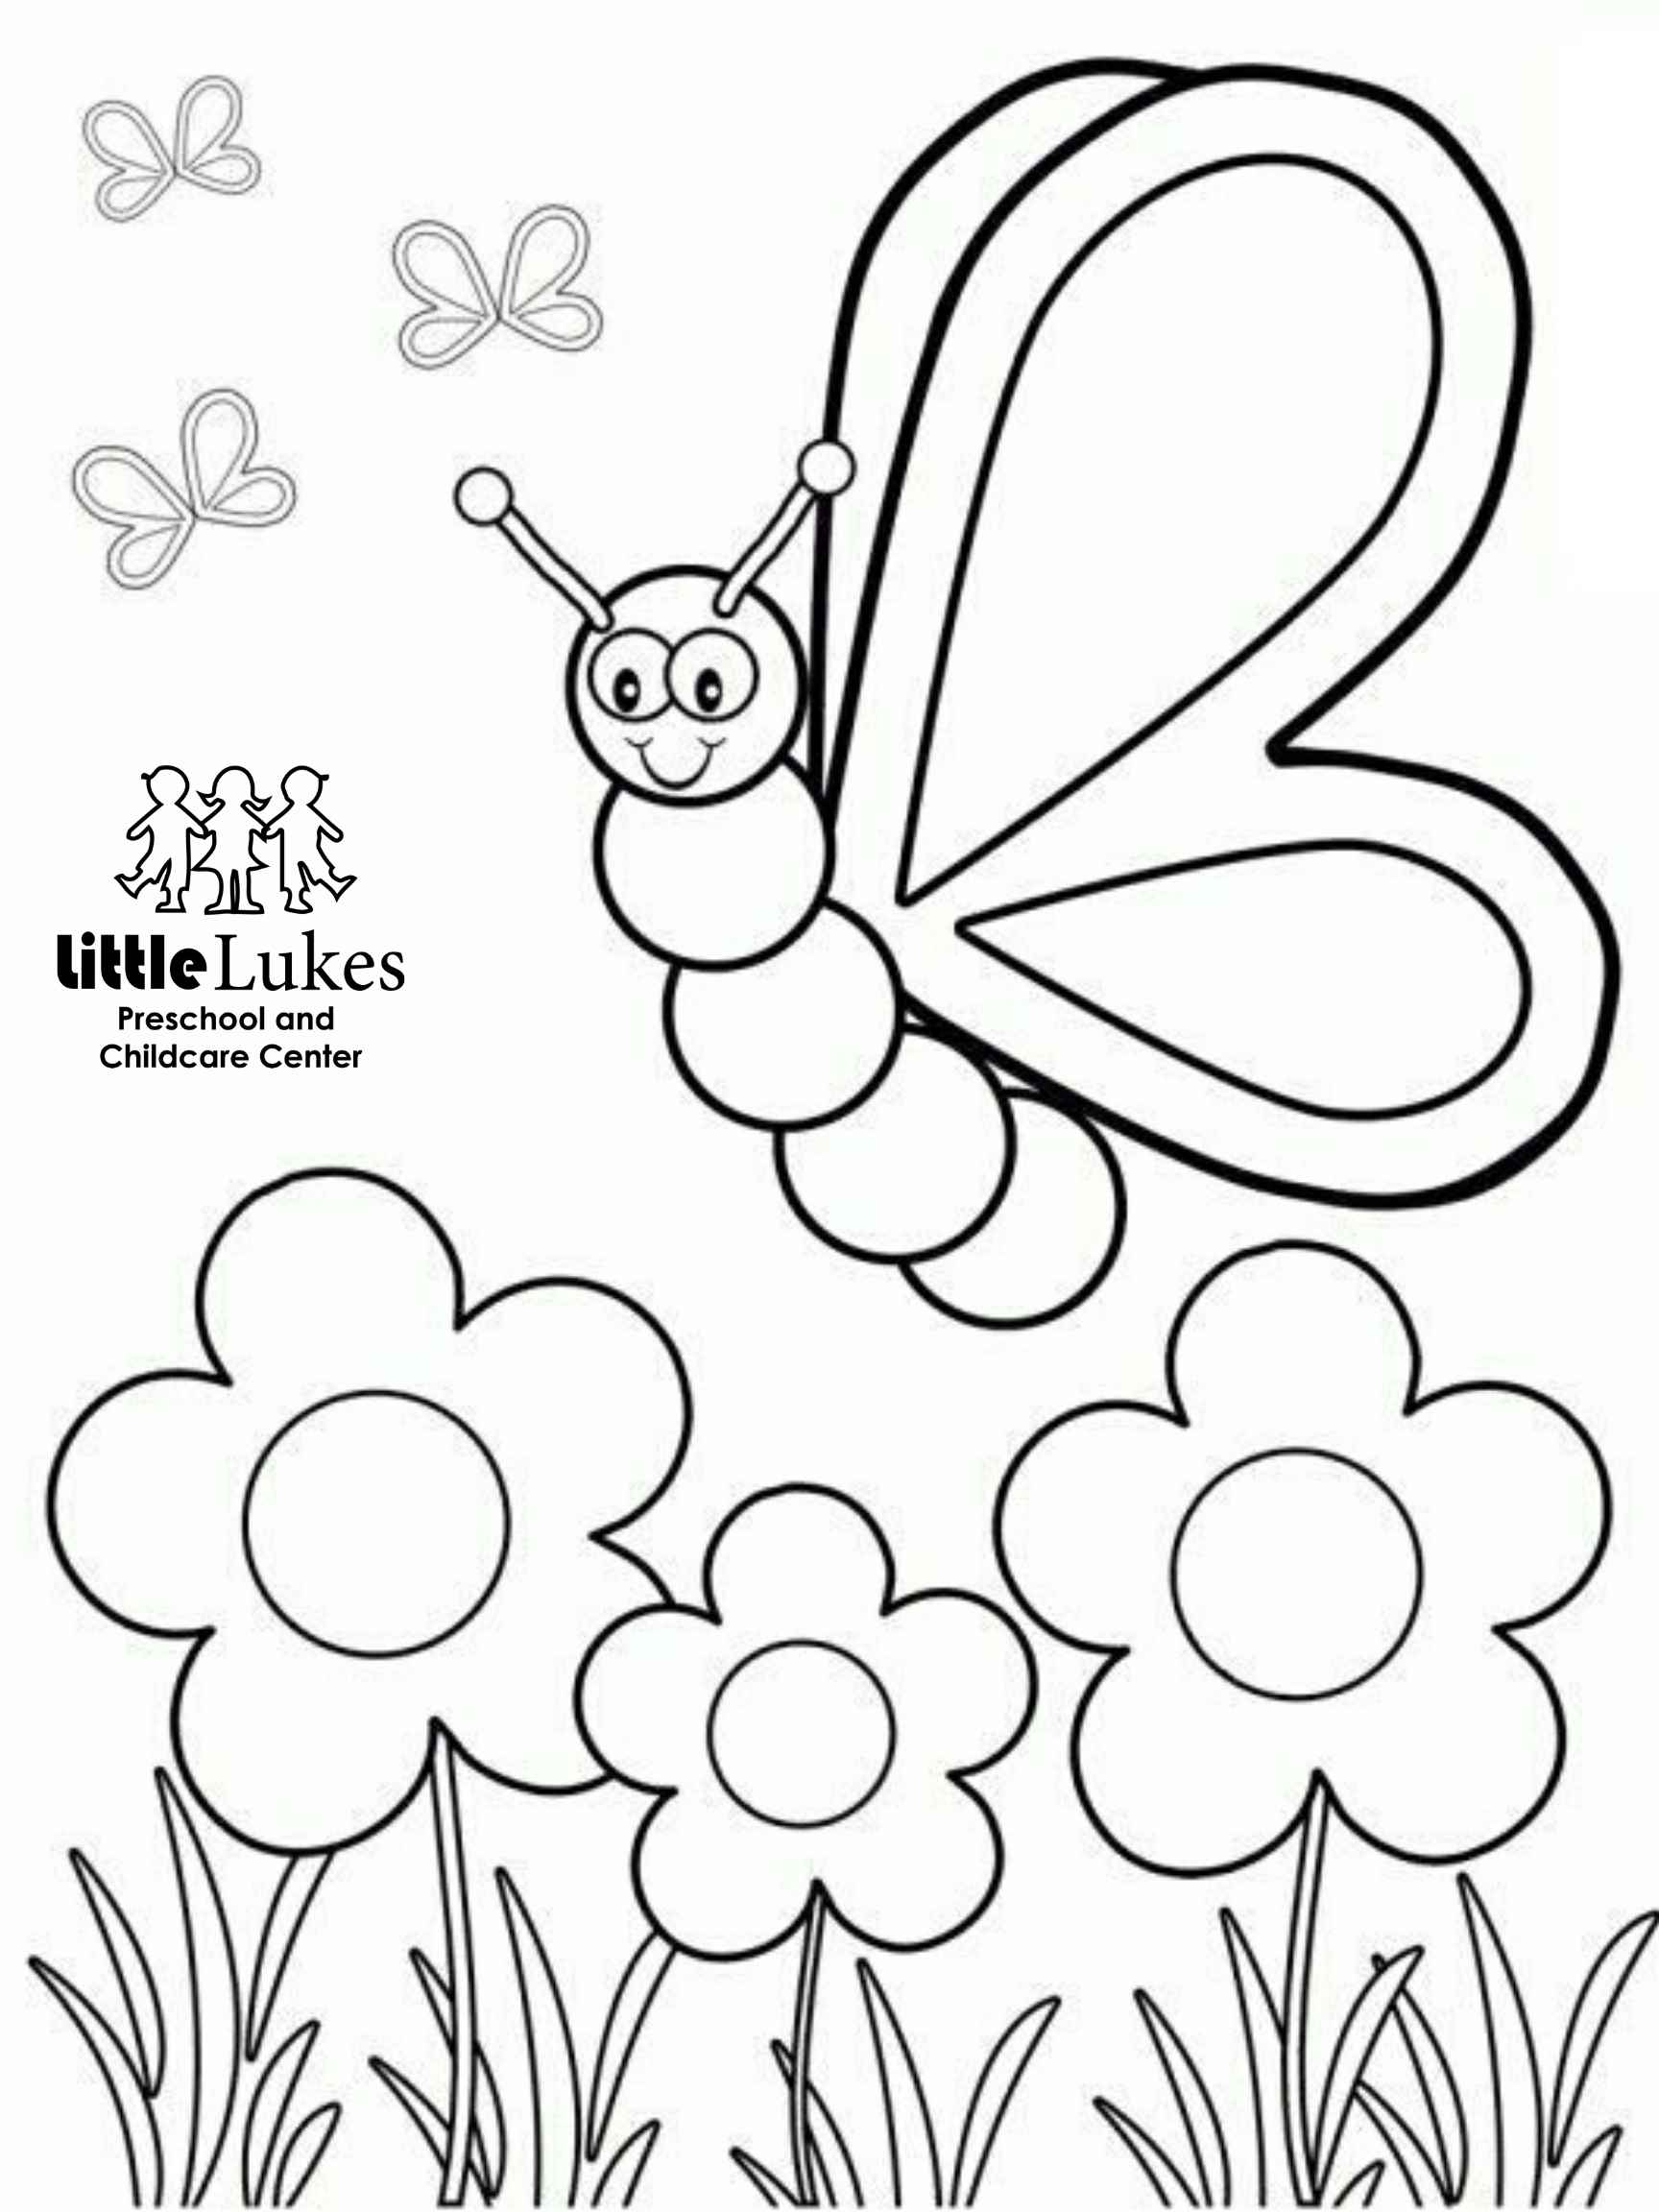 free-spring-coloring-pages-little-lukes-preschool-and-childcare-center